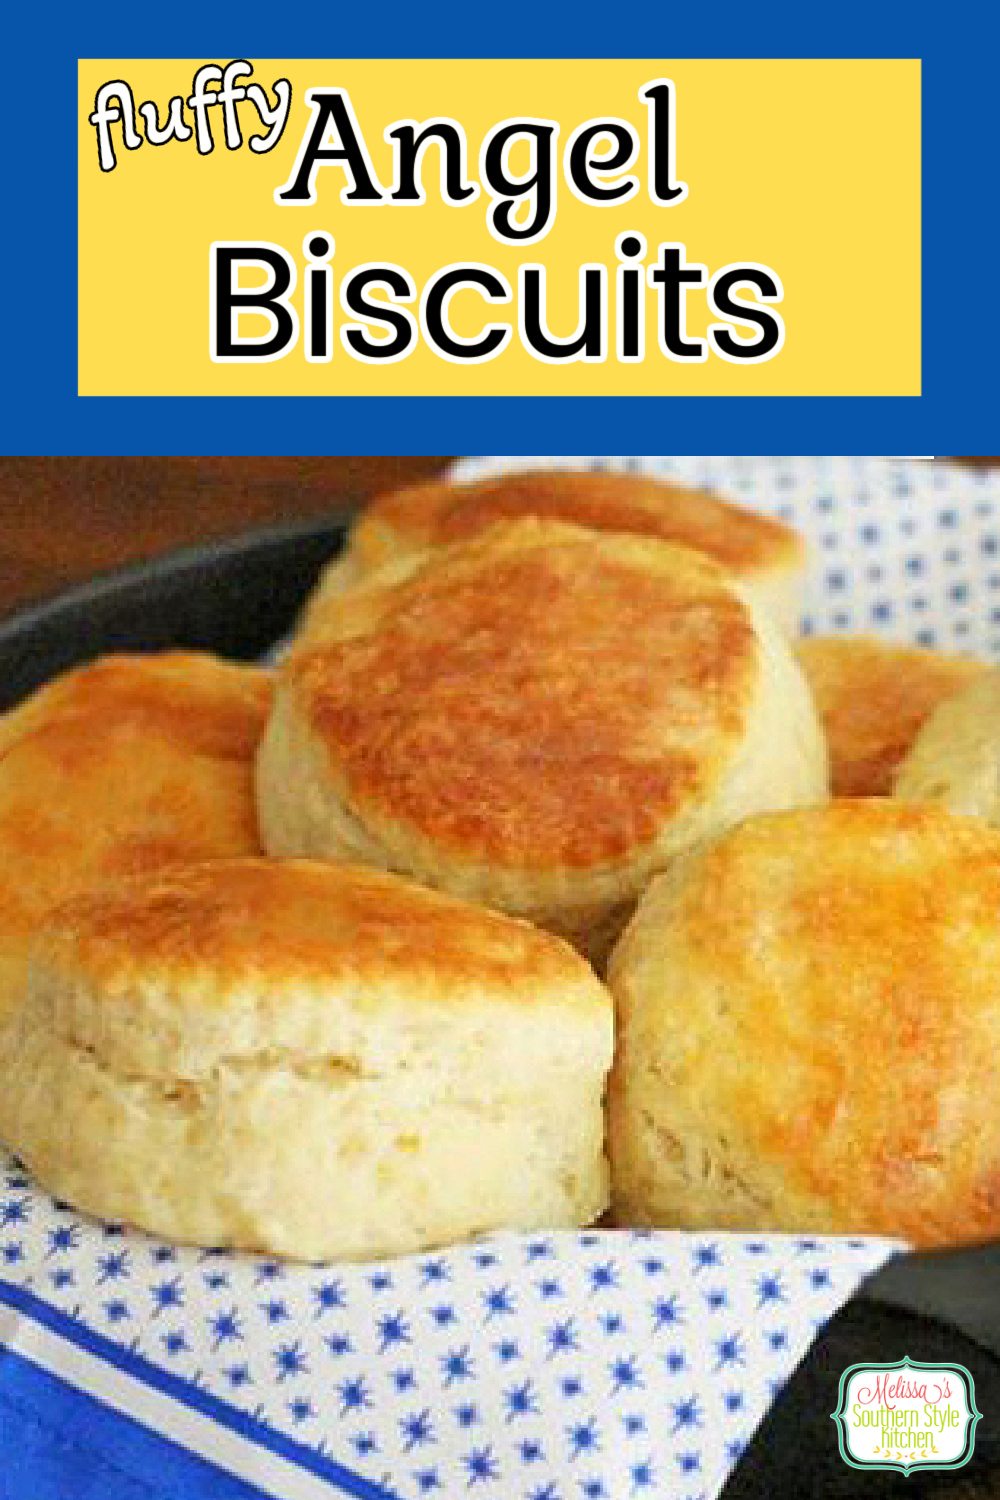 These irresistible Angel Biscuits are a cross between a buttermilk biscuit and yeast-like dinner roll #angelbiscuits #biscuitrecipes #rolls #breadrecipes #southernbiscuits #buttermilkbiscuits #holidaybrunch #brunchrecipes #breakfast #food #recipes #Southernfood #Southernrecipes via @melissasssk